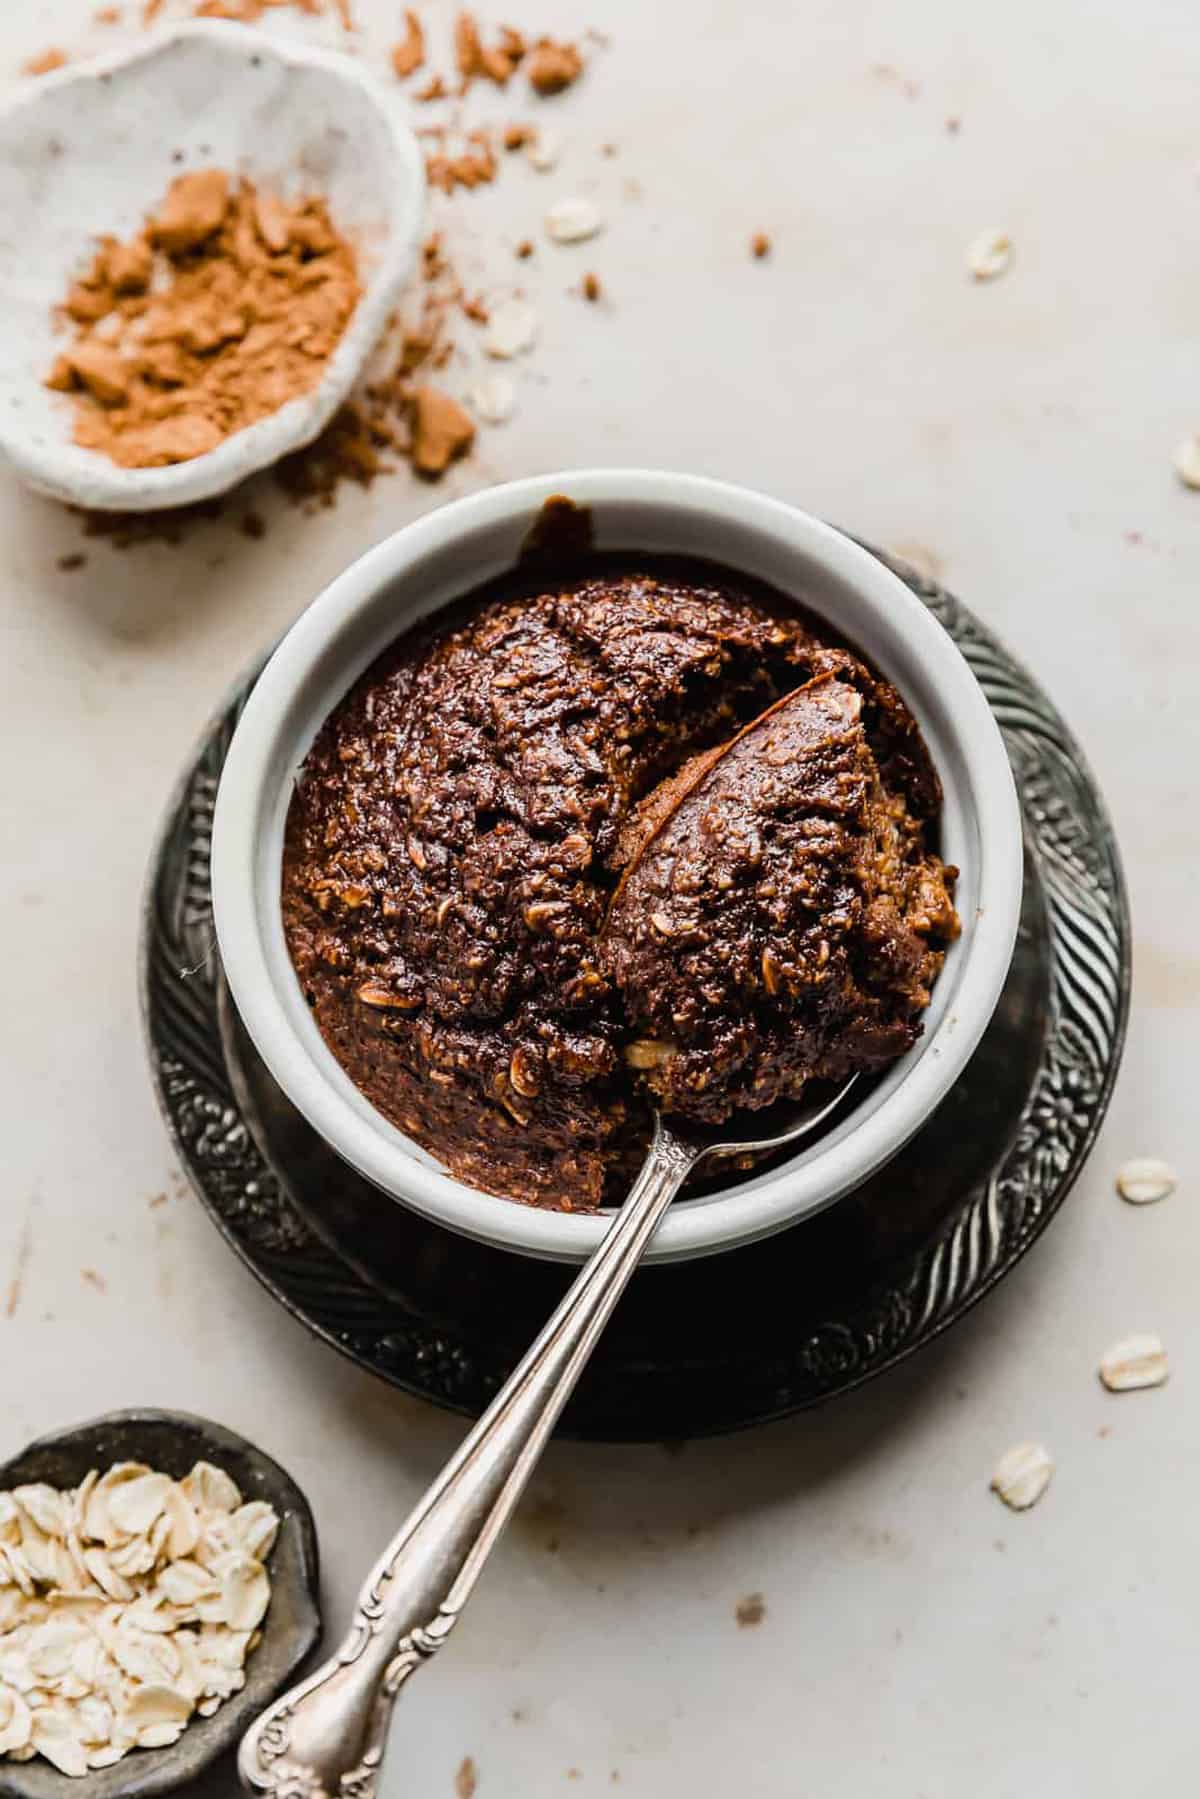 Chocolate Baked Oats in a white ramekin with a spoon scooping out some oats.